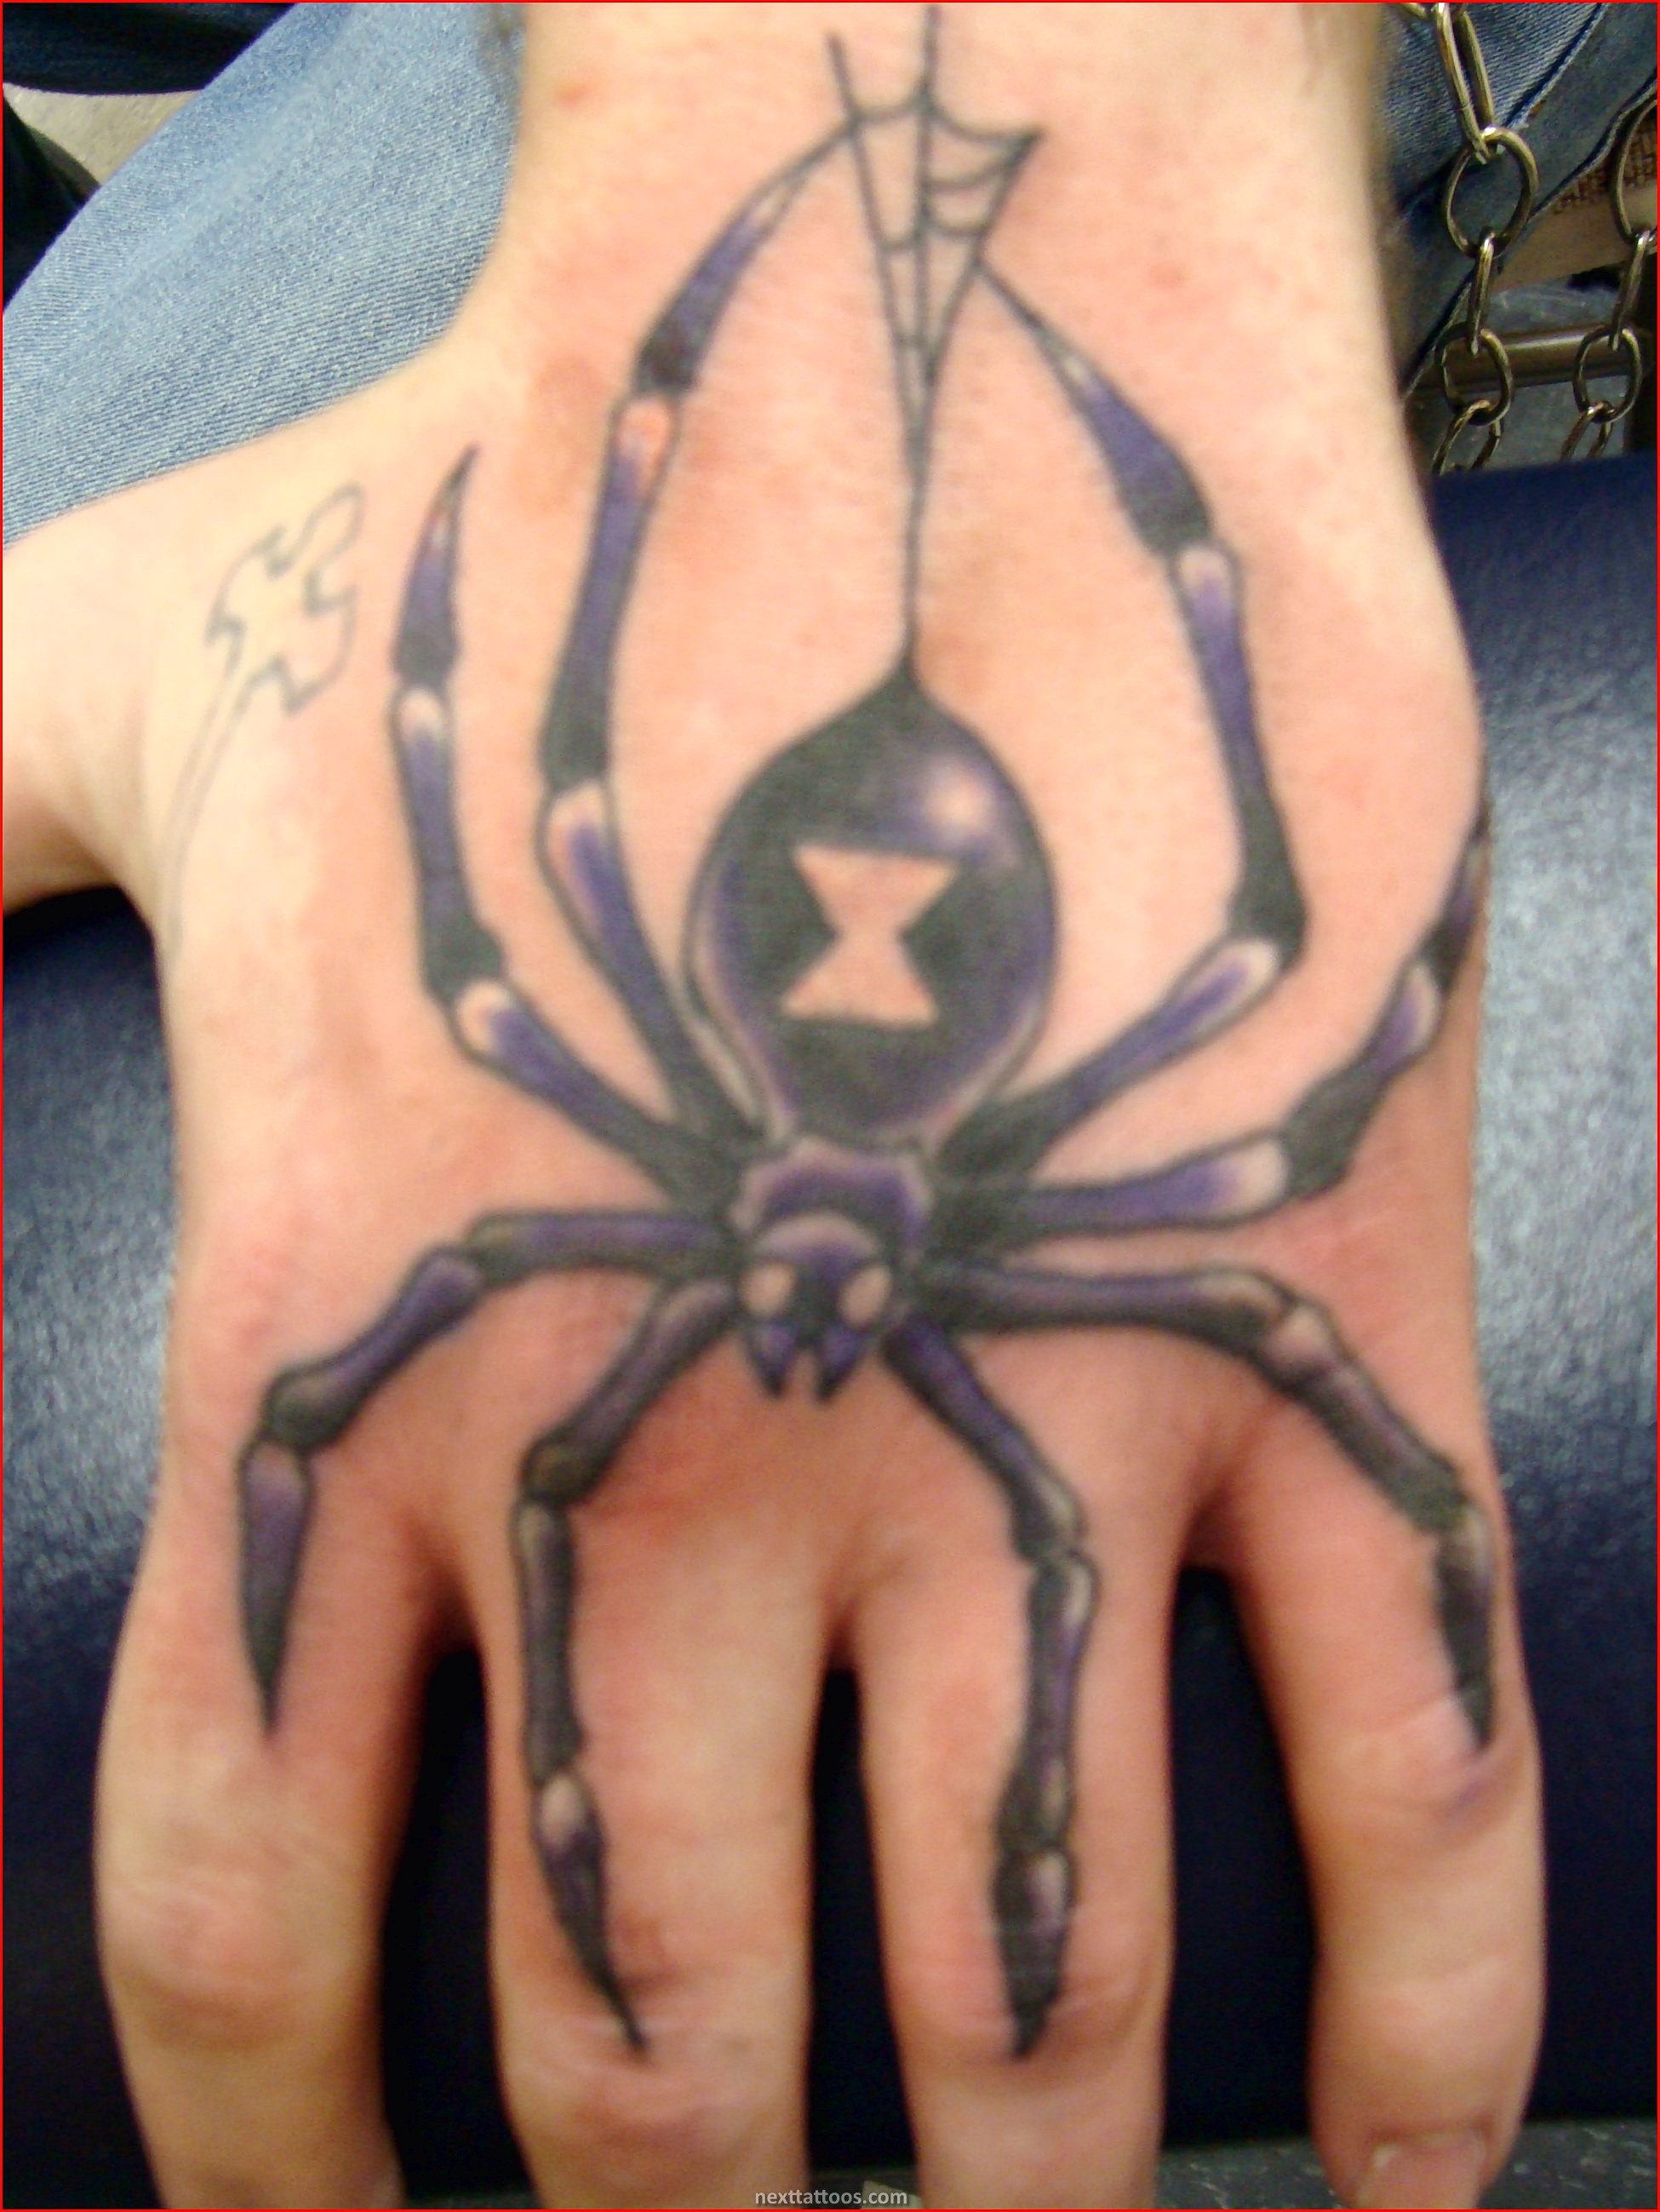 Looking For Hand Tattoos For Men?